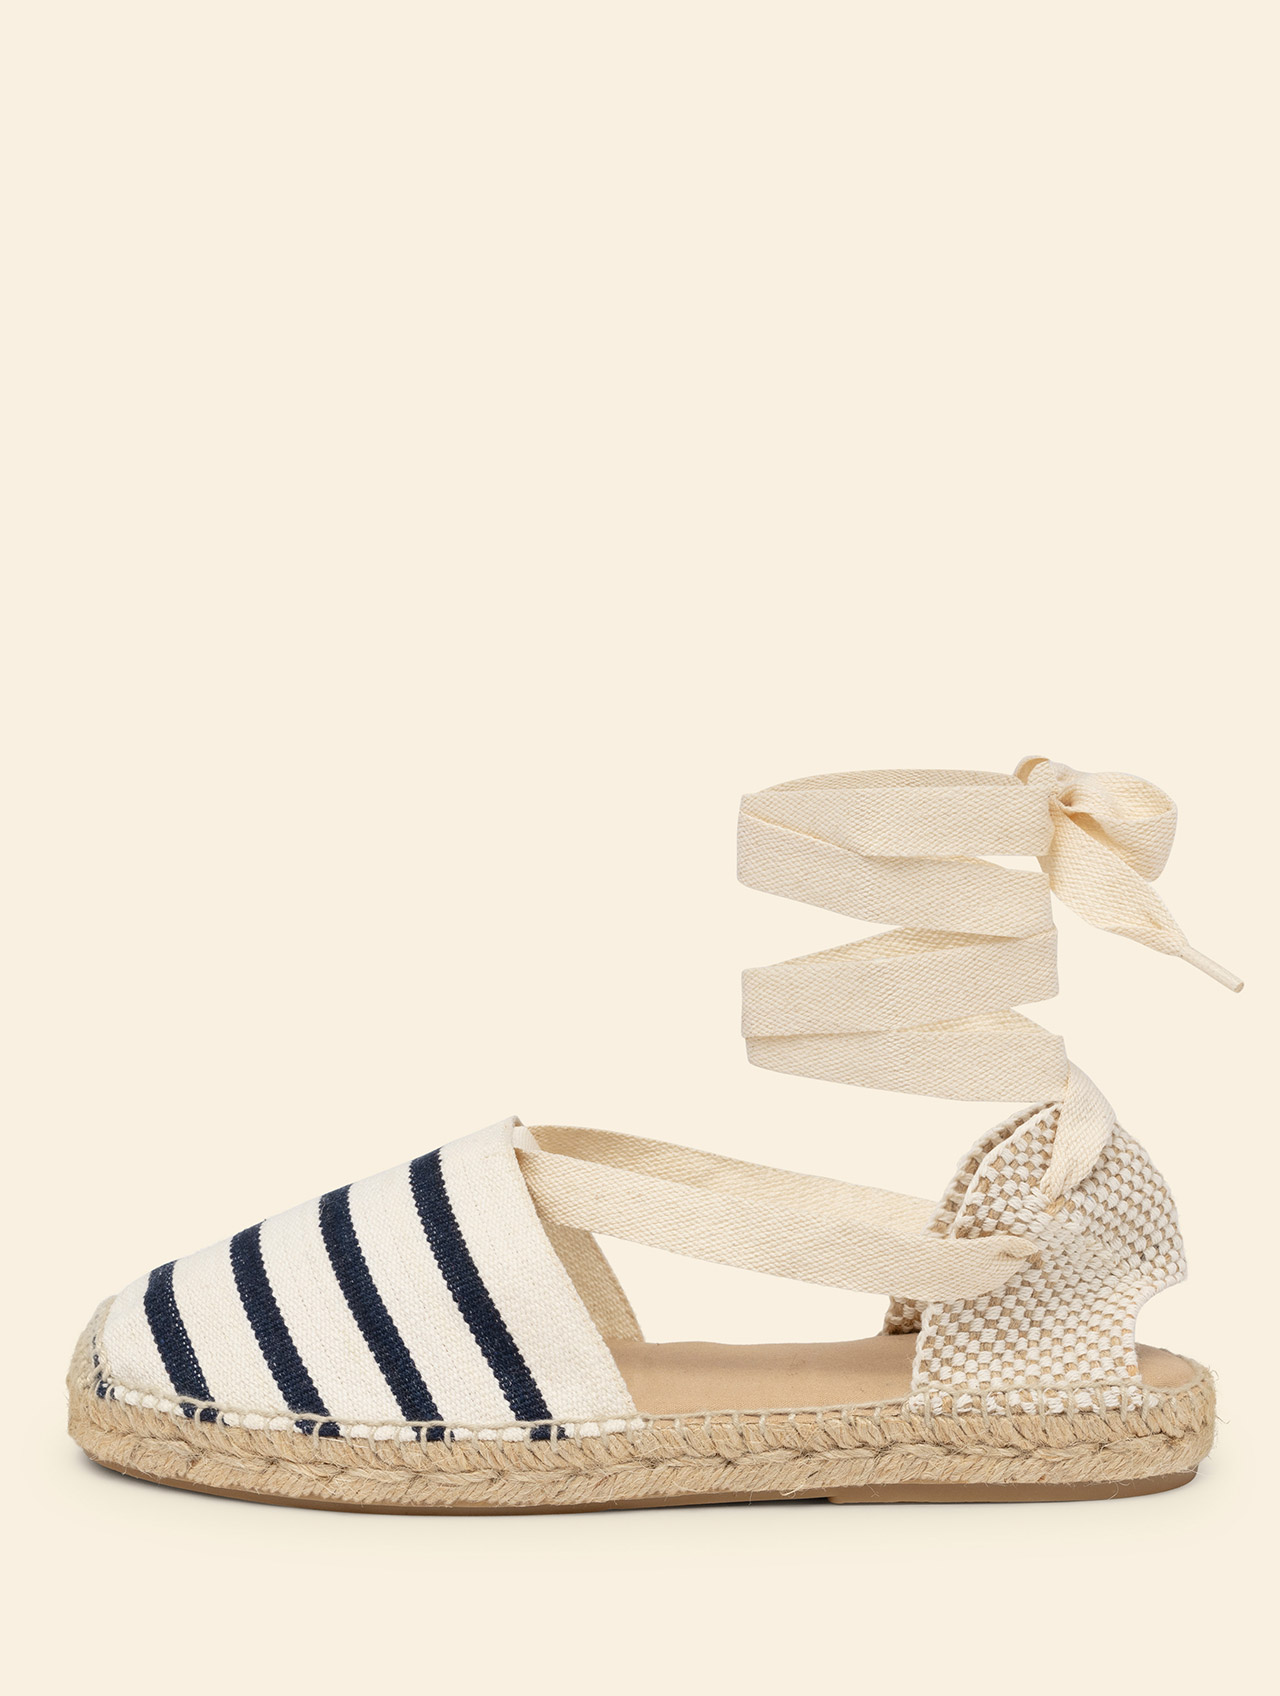 Woman flat espadrille valenciana stripes ivory and navy. Lace up espadrille